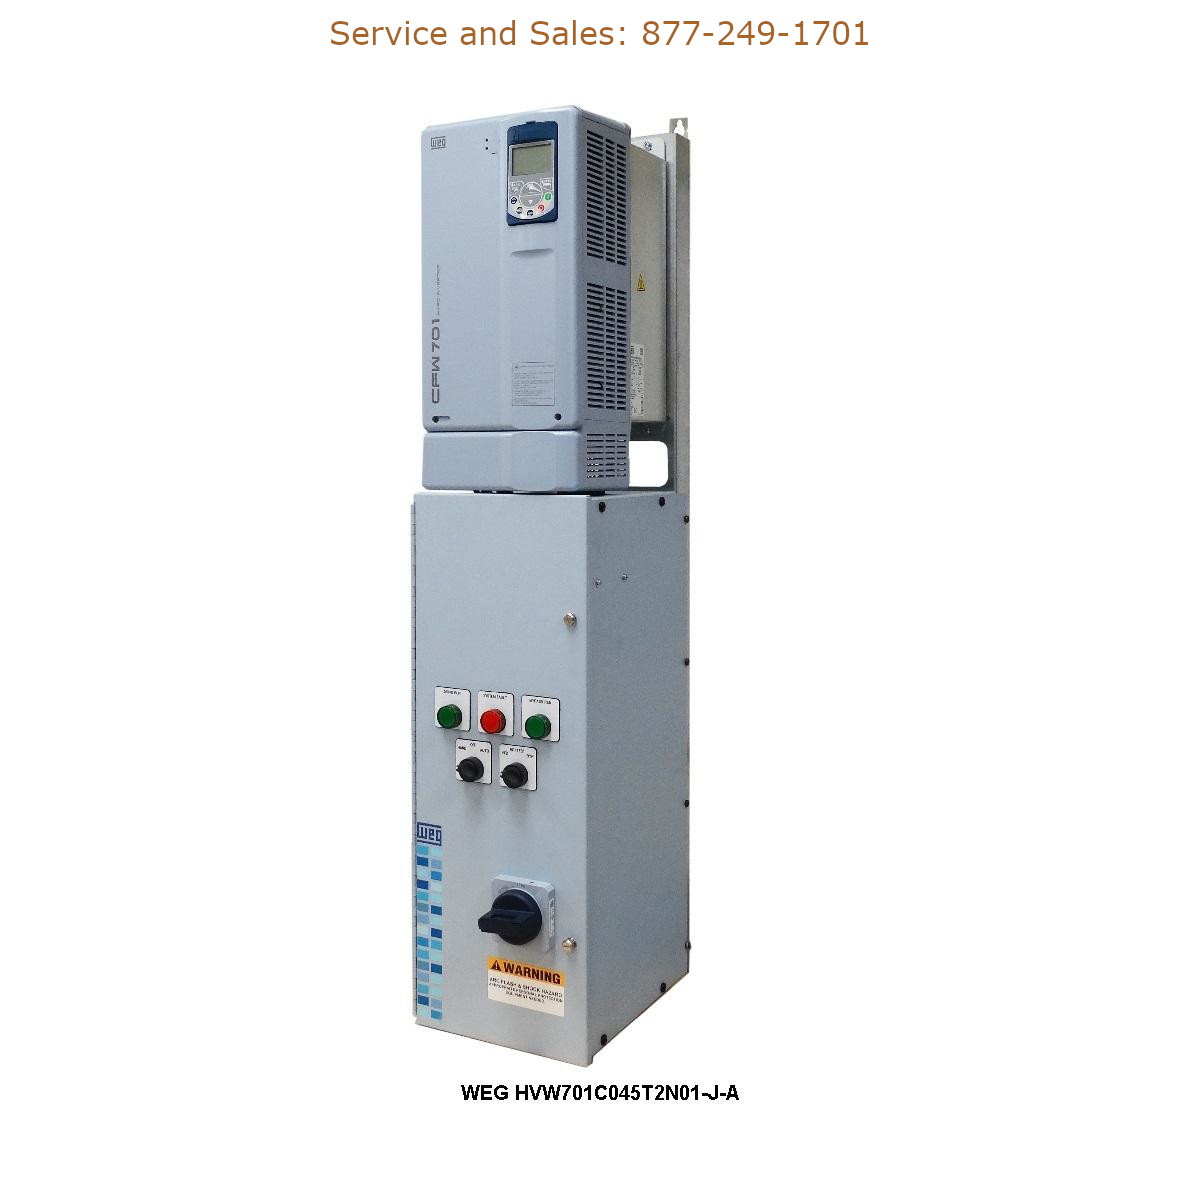 WEG HVW701C045T2N01-J-A WEG Model Number HVW701C045T2N01-J-A WEG Drives, Variable Speed Drives Repair Service, Troubleshooting, Replacement Parts https://gesrepair.com/wp-content/uploads/2022/WEG/WEG_HVW701C045T2N01-J-A_Drives_Variable_Speed_Drives.jpg